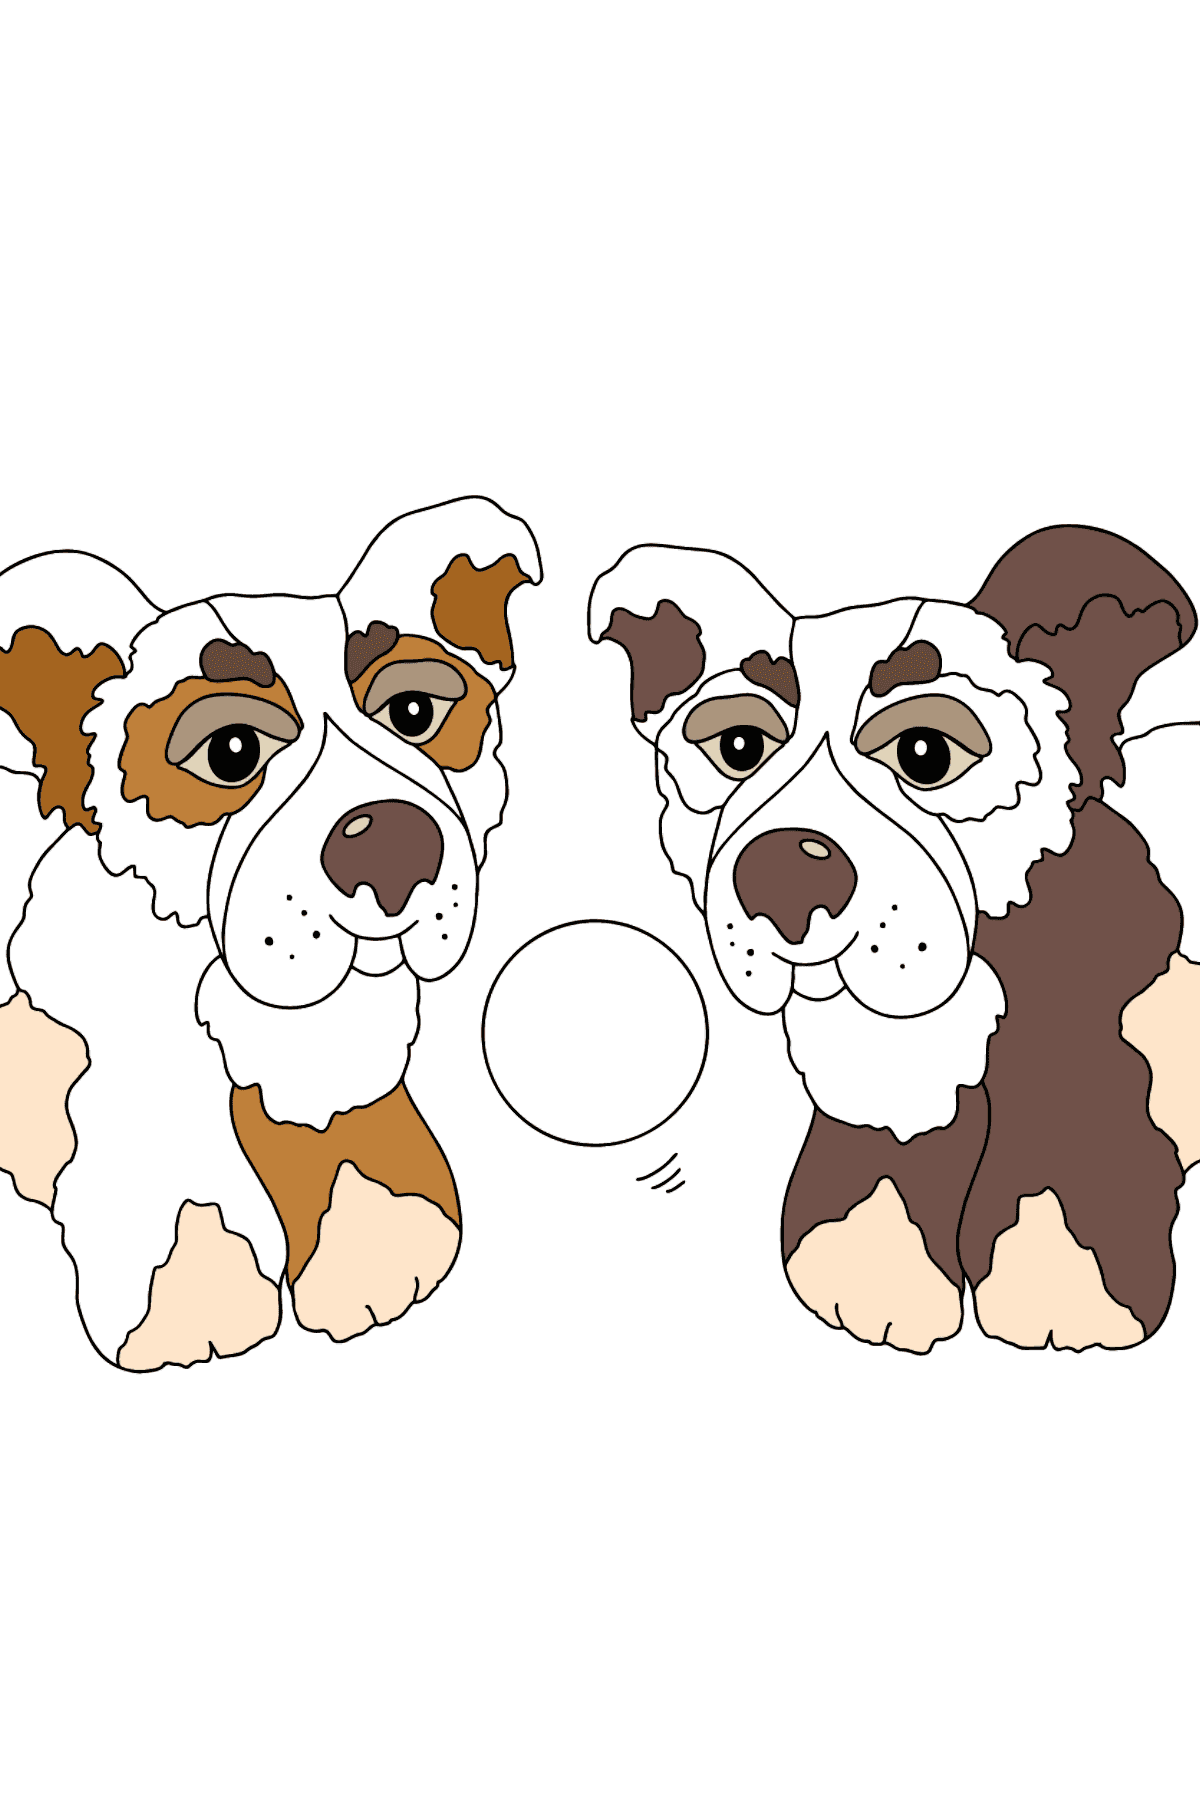 Coloring Page - Dogs are Playing Energetically with a Ball - Coloring Pages for Kids